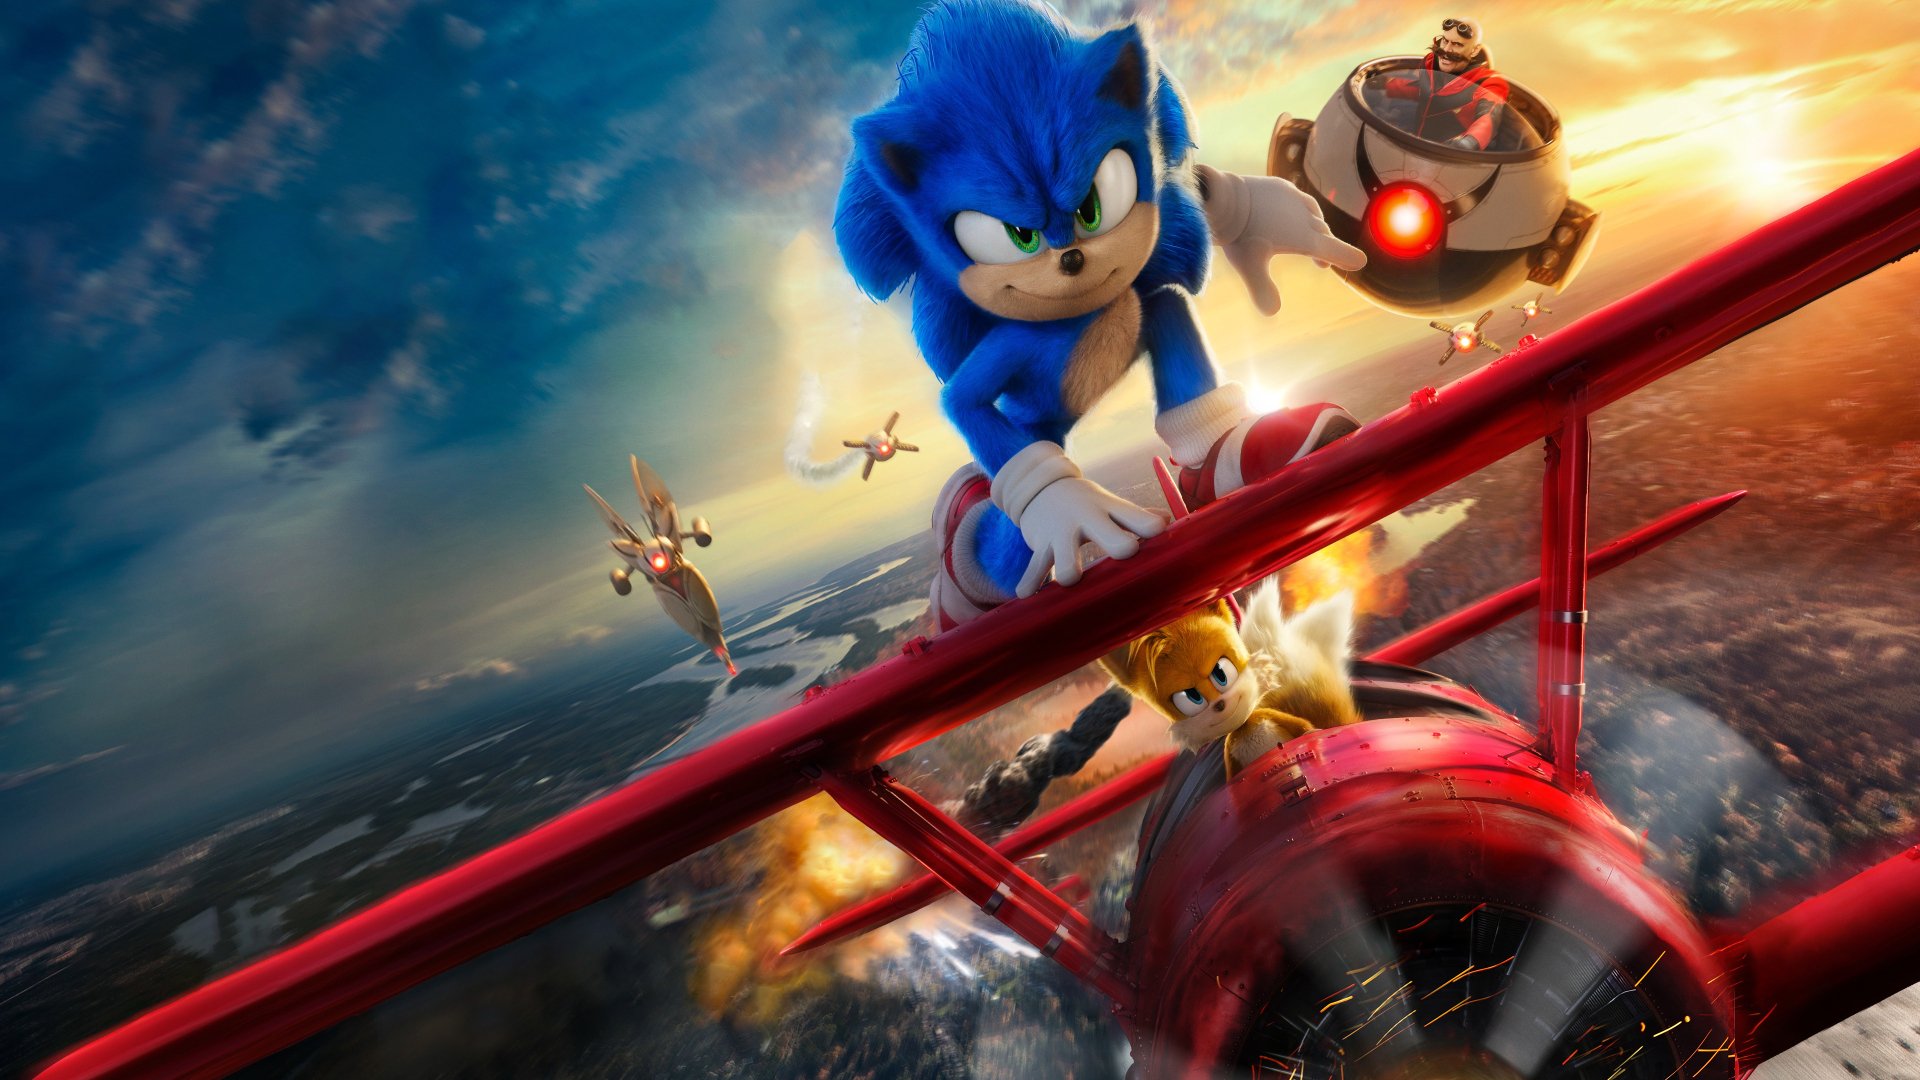 1377382 sonic 2 2022 movie poster 4k  Rare Gallery HD Wallpapers